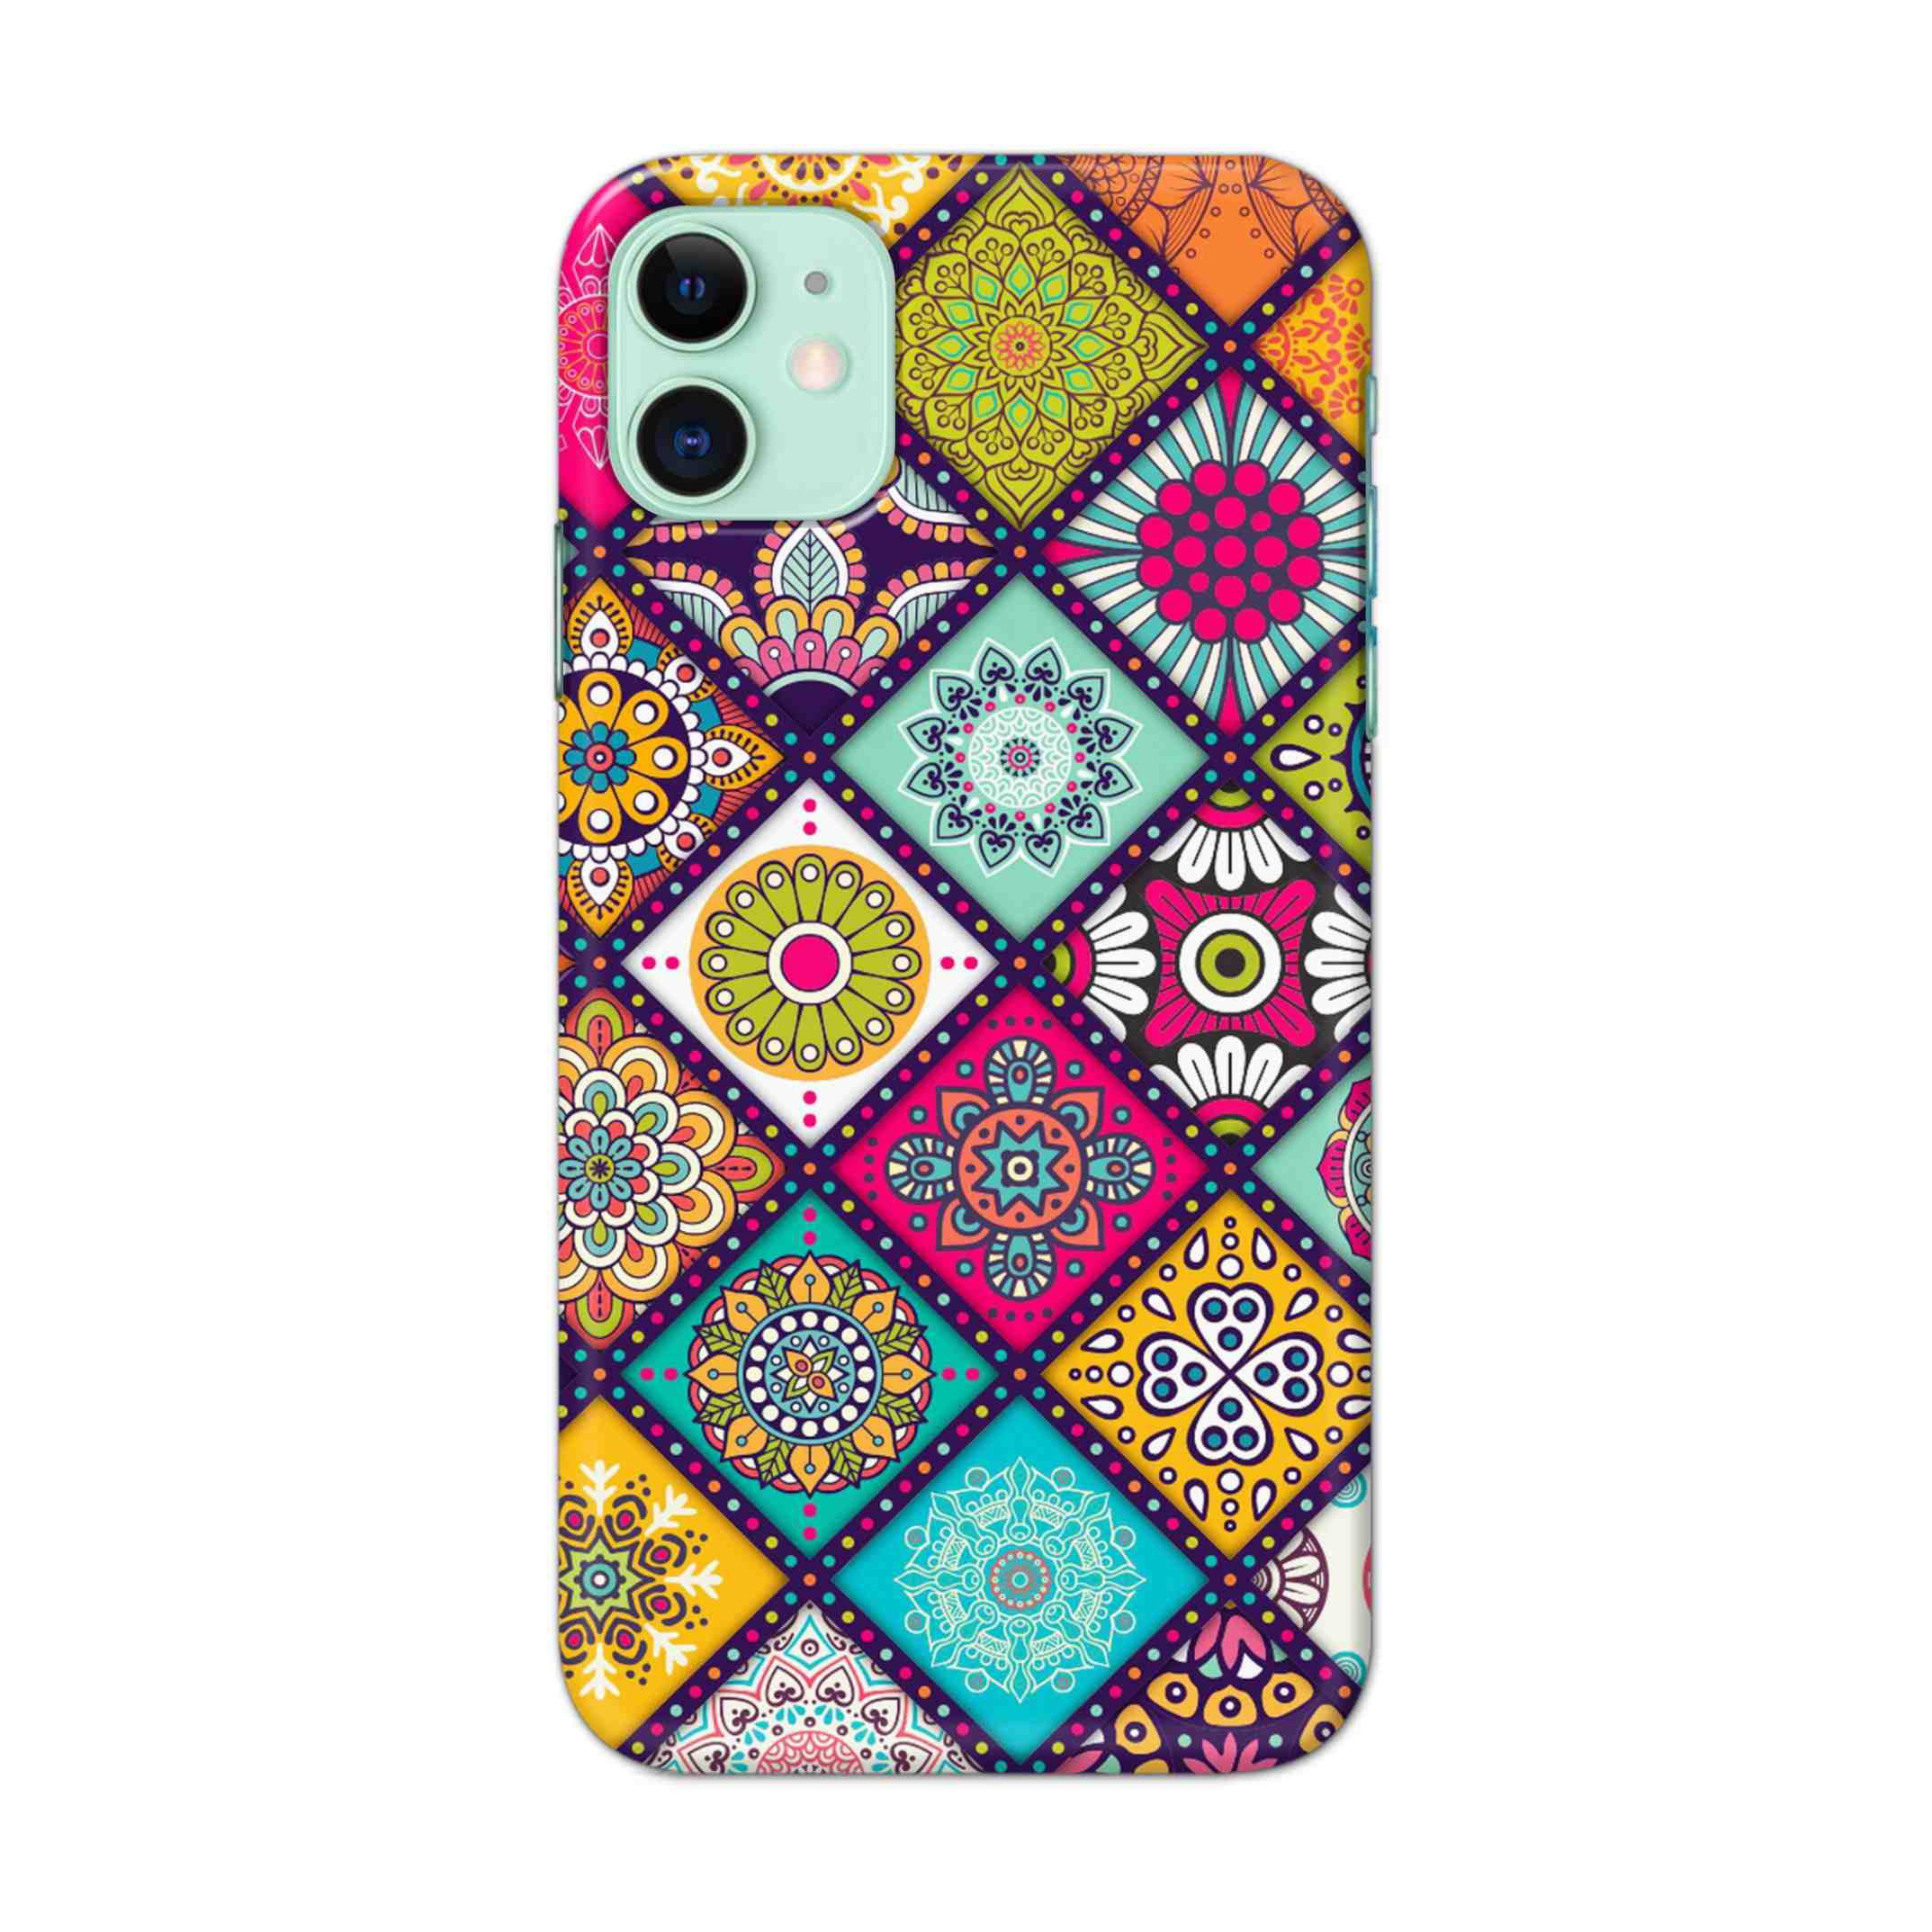 Buy Mandala Texture Hard Back Mobile Phone Case Cover For iPhone 11 Online